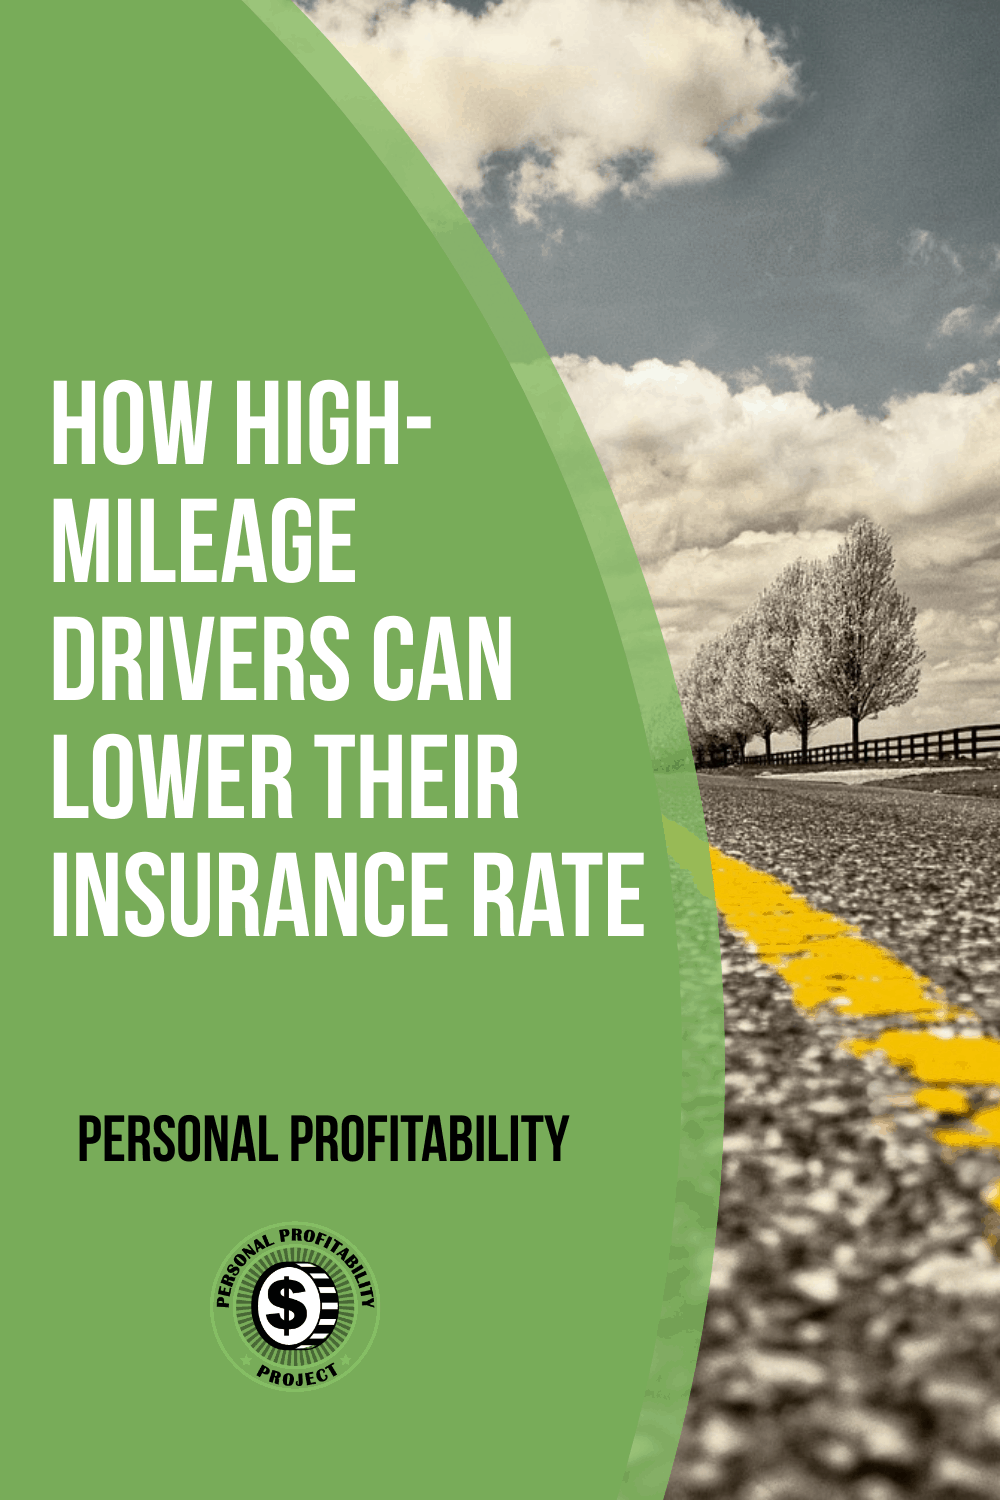 How High-Mileage Drivers Can Lower Their Insurance Rate